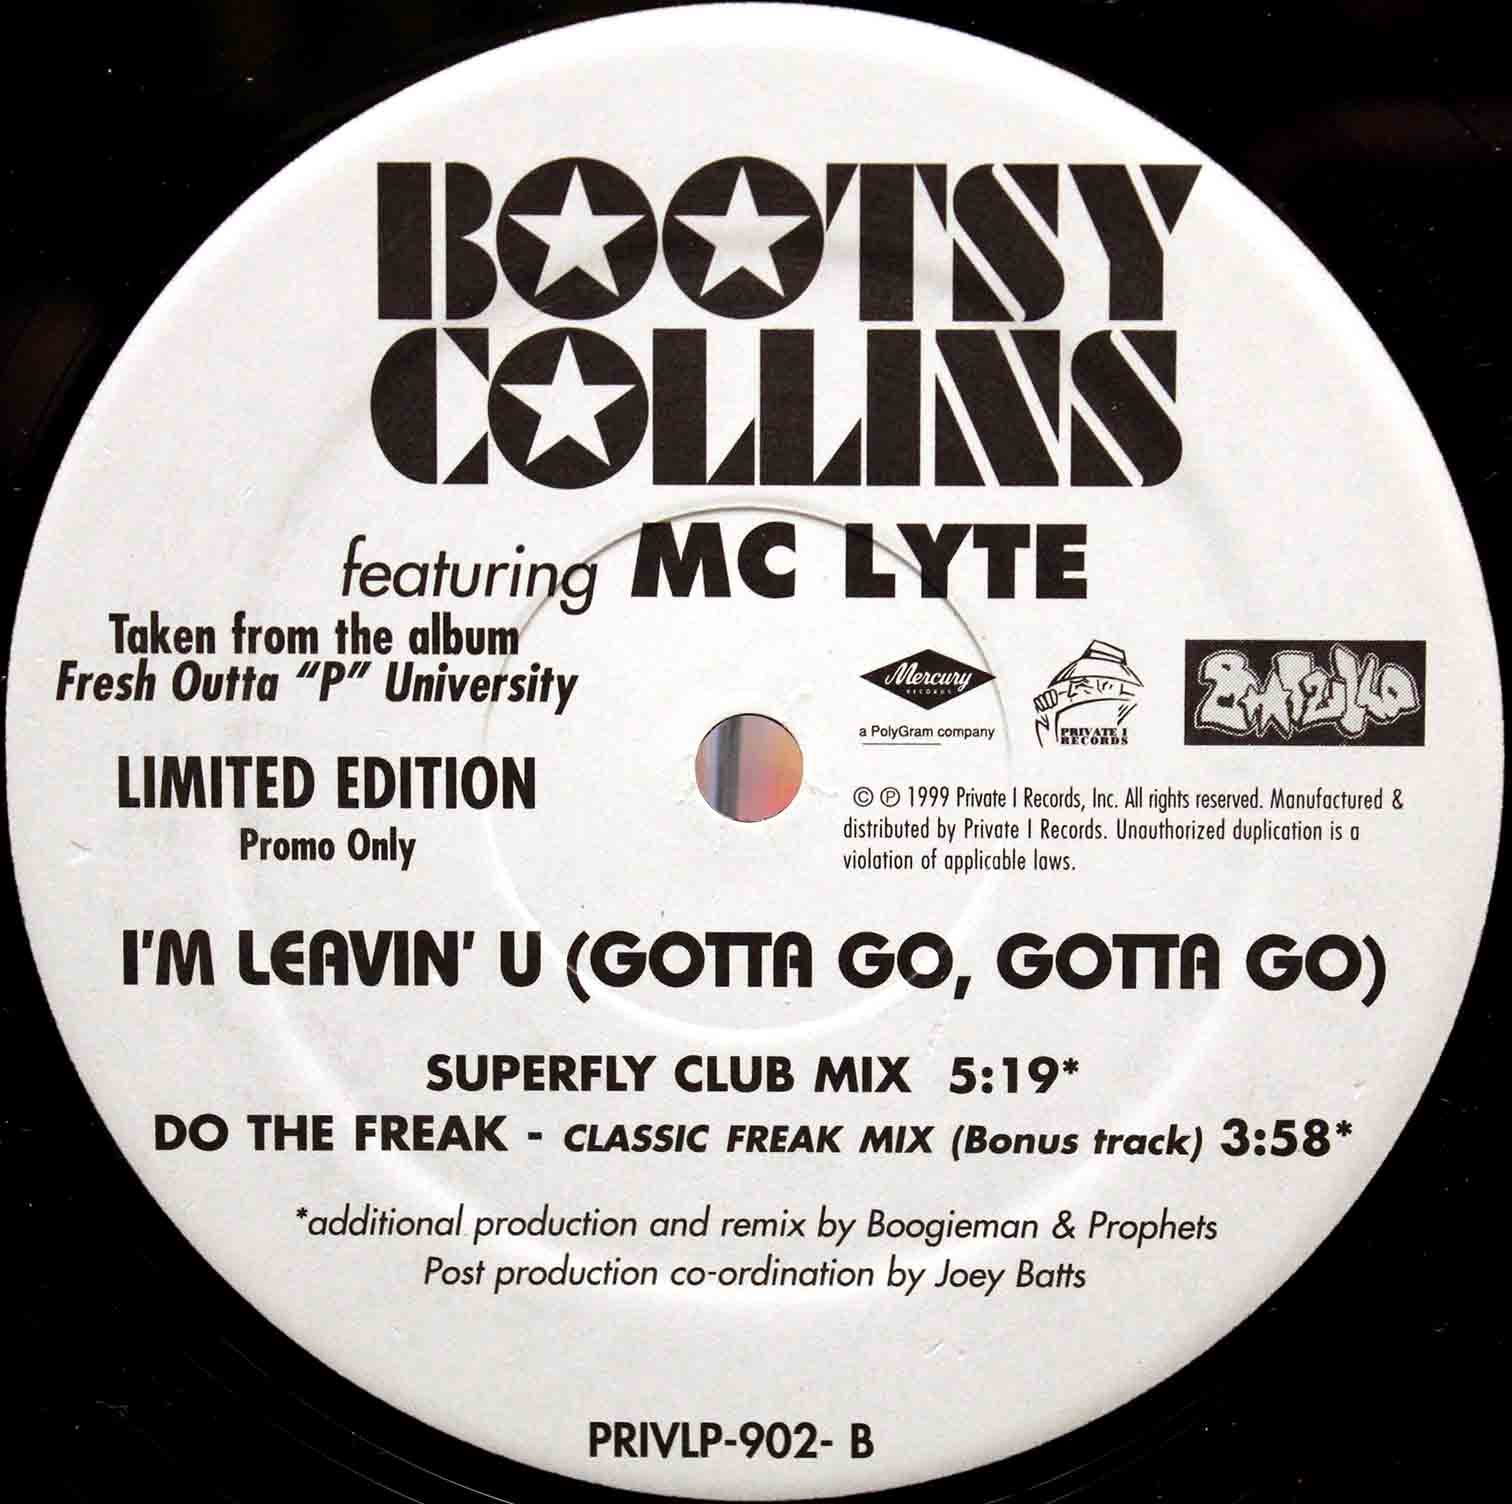 Bootsy Collins - Im Leavin You 04